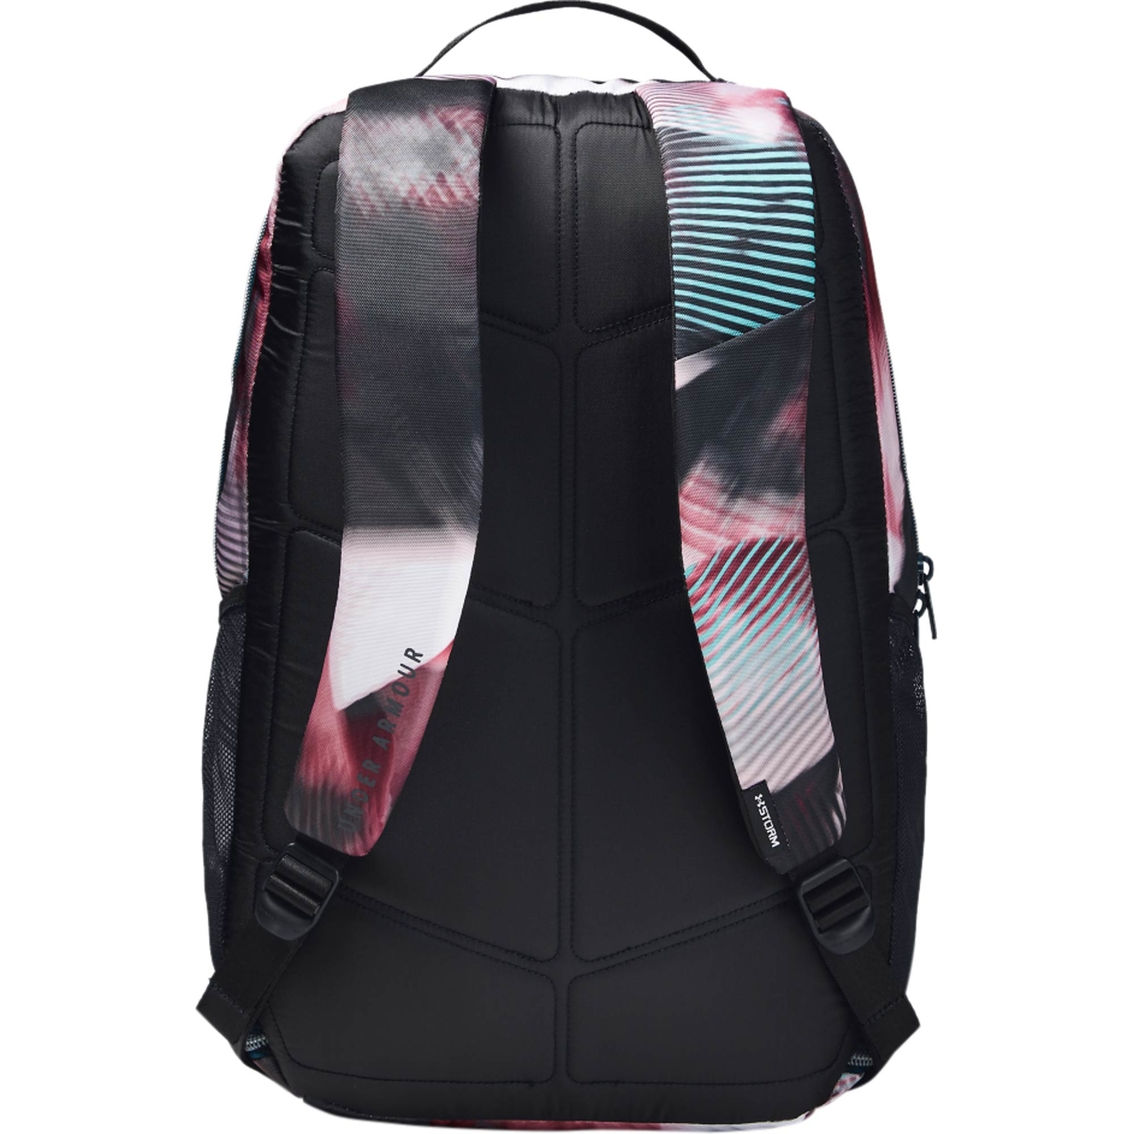 Under Armour Imprint Backpack - Image 2 of 2